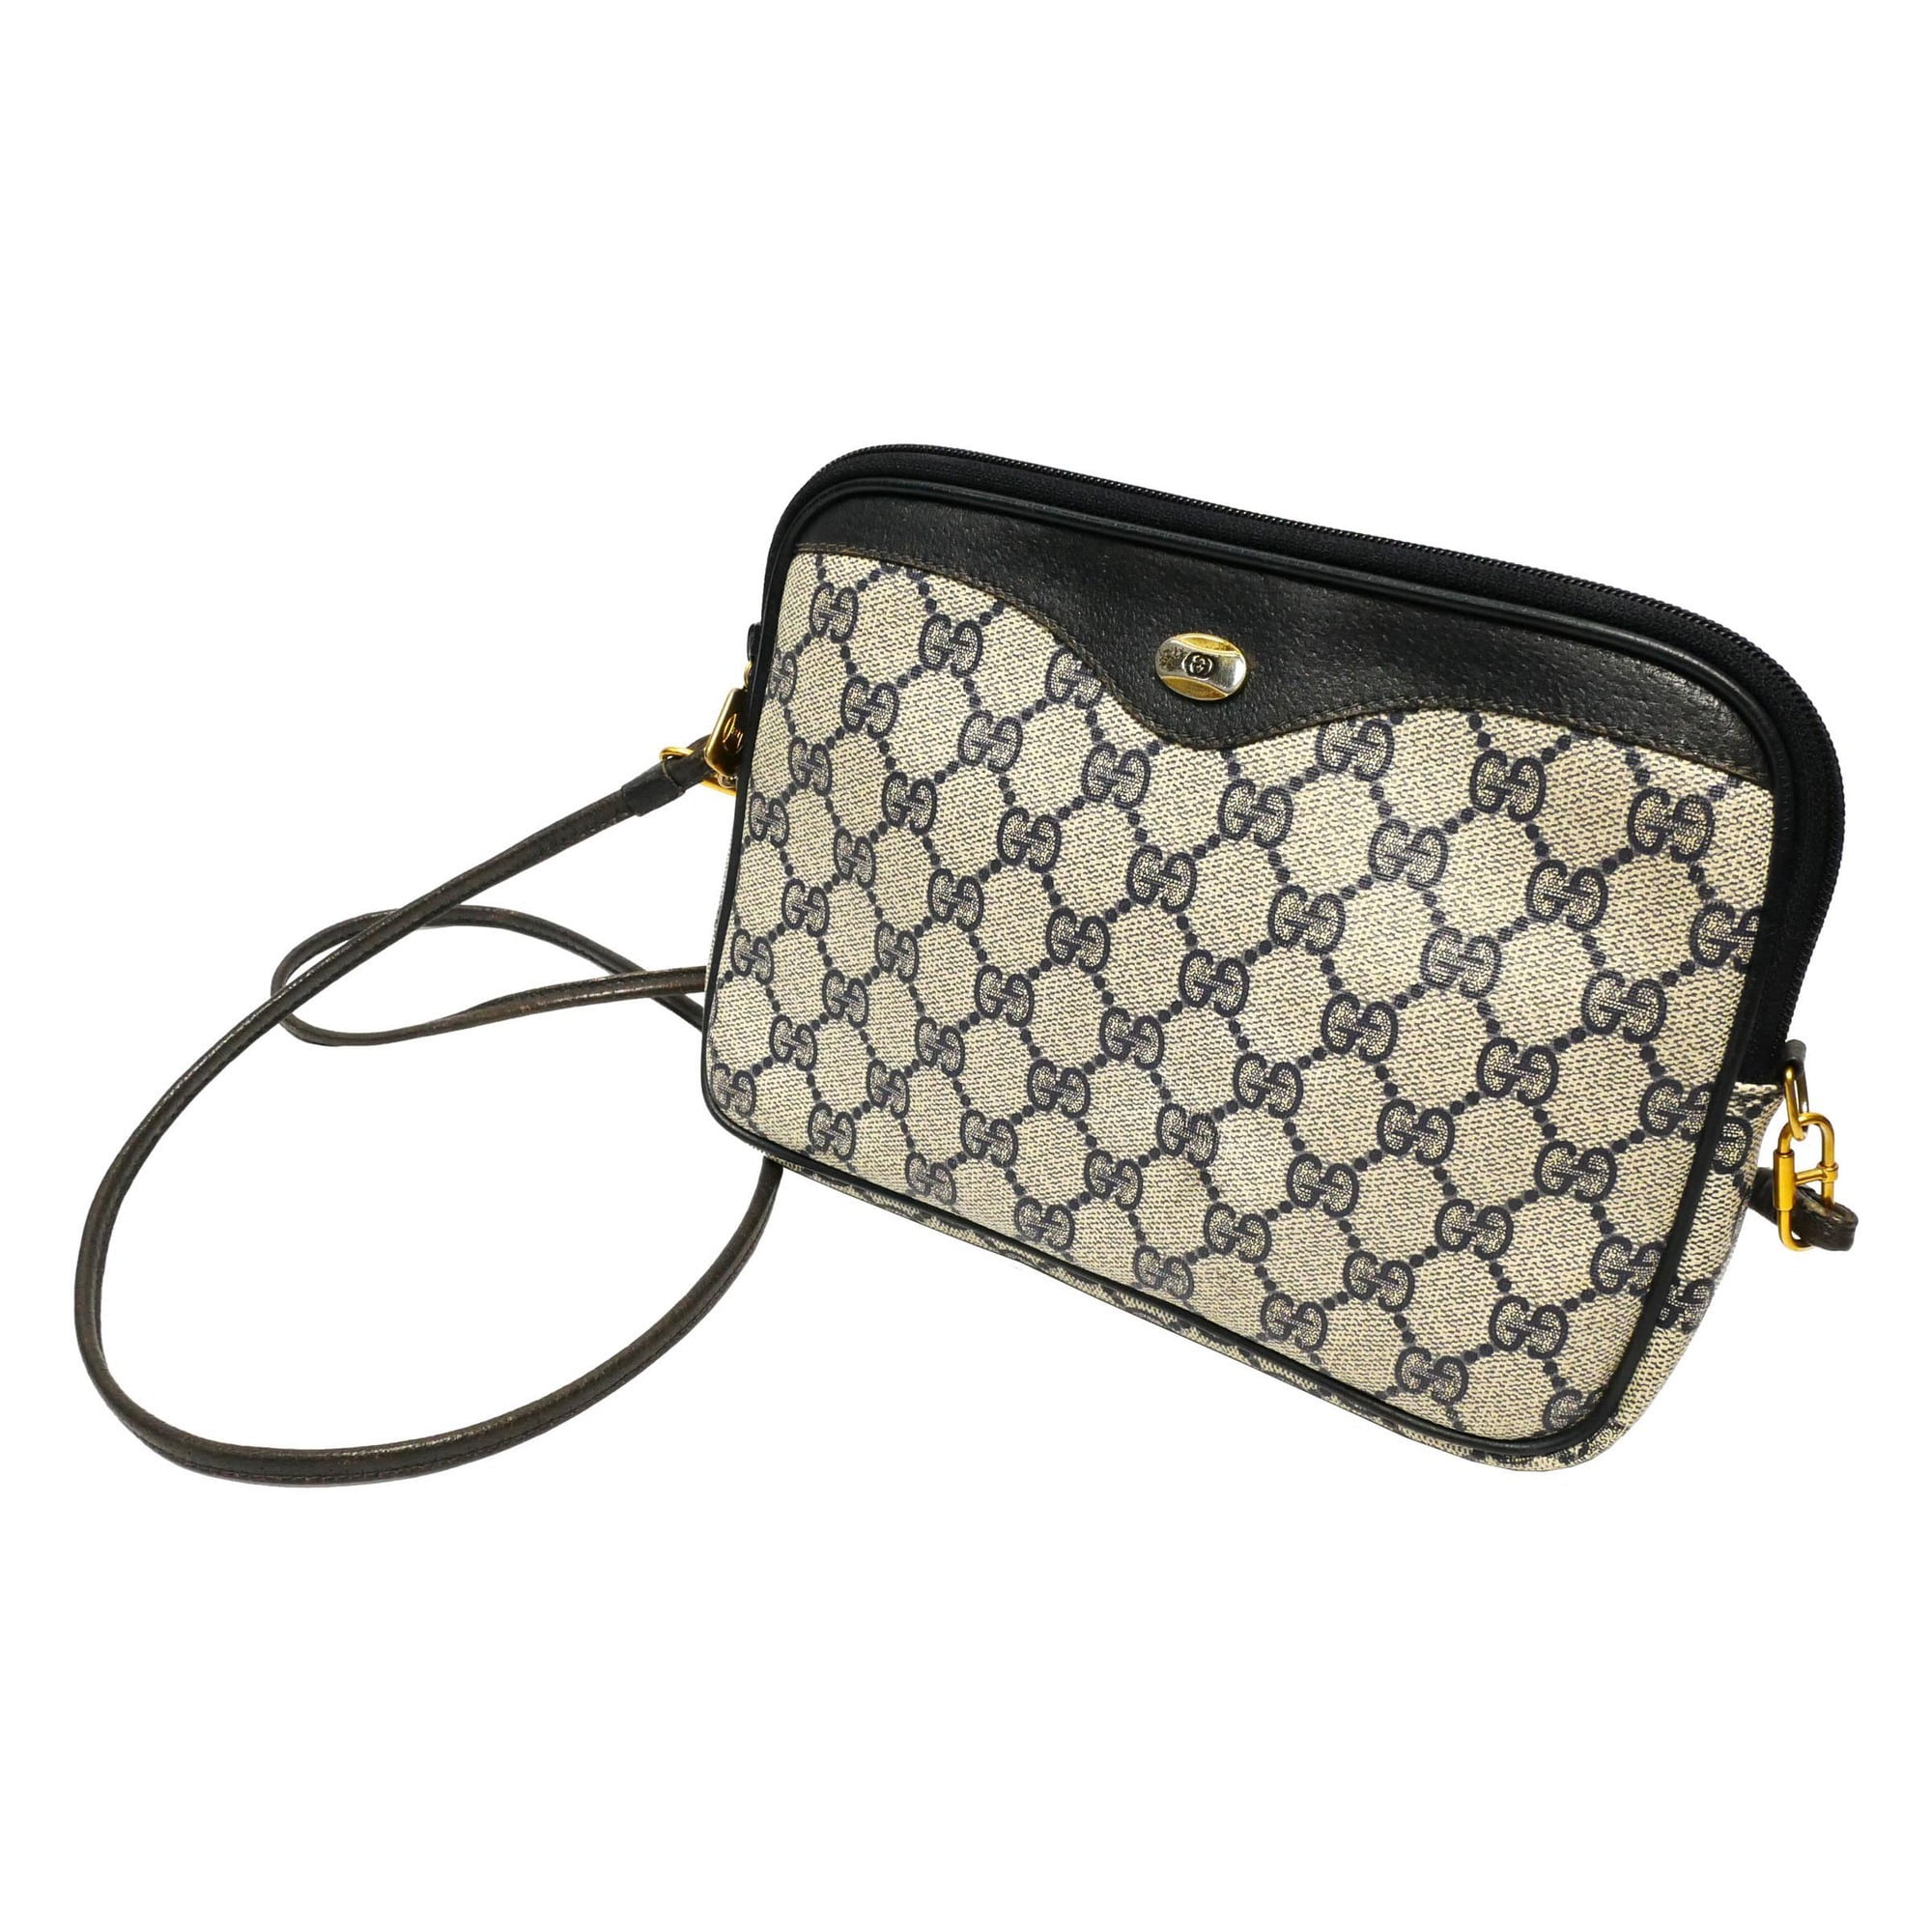 Used GUCCI Old Gucci Vintage Accessory Collection Crossbody